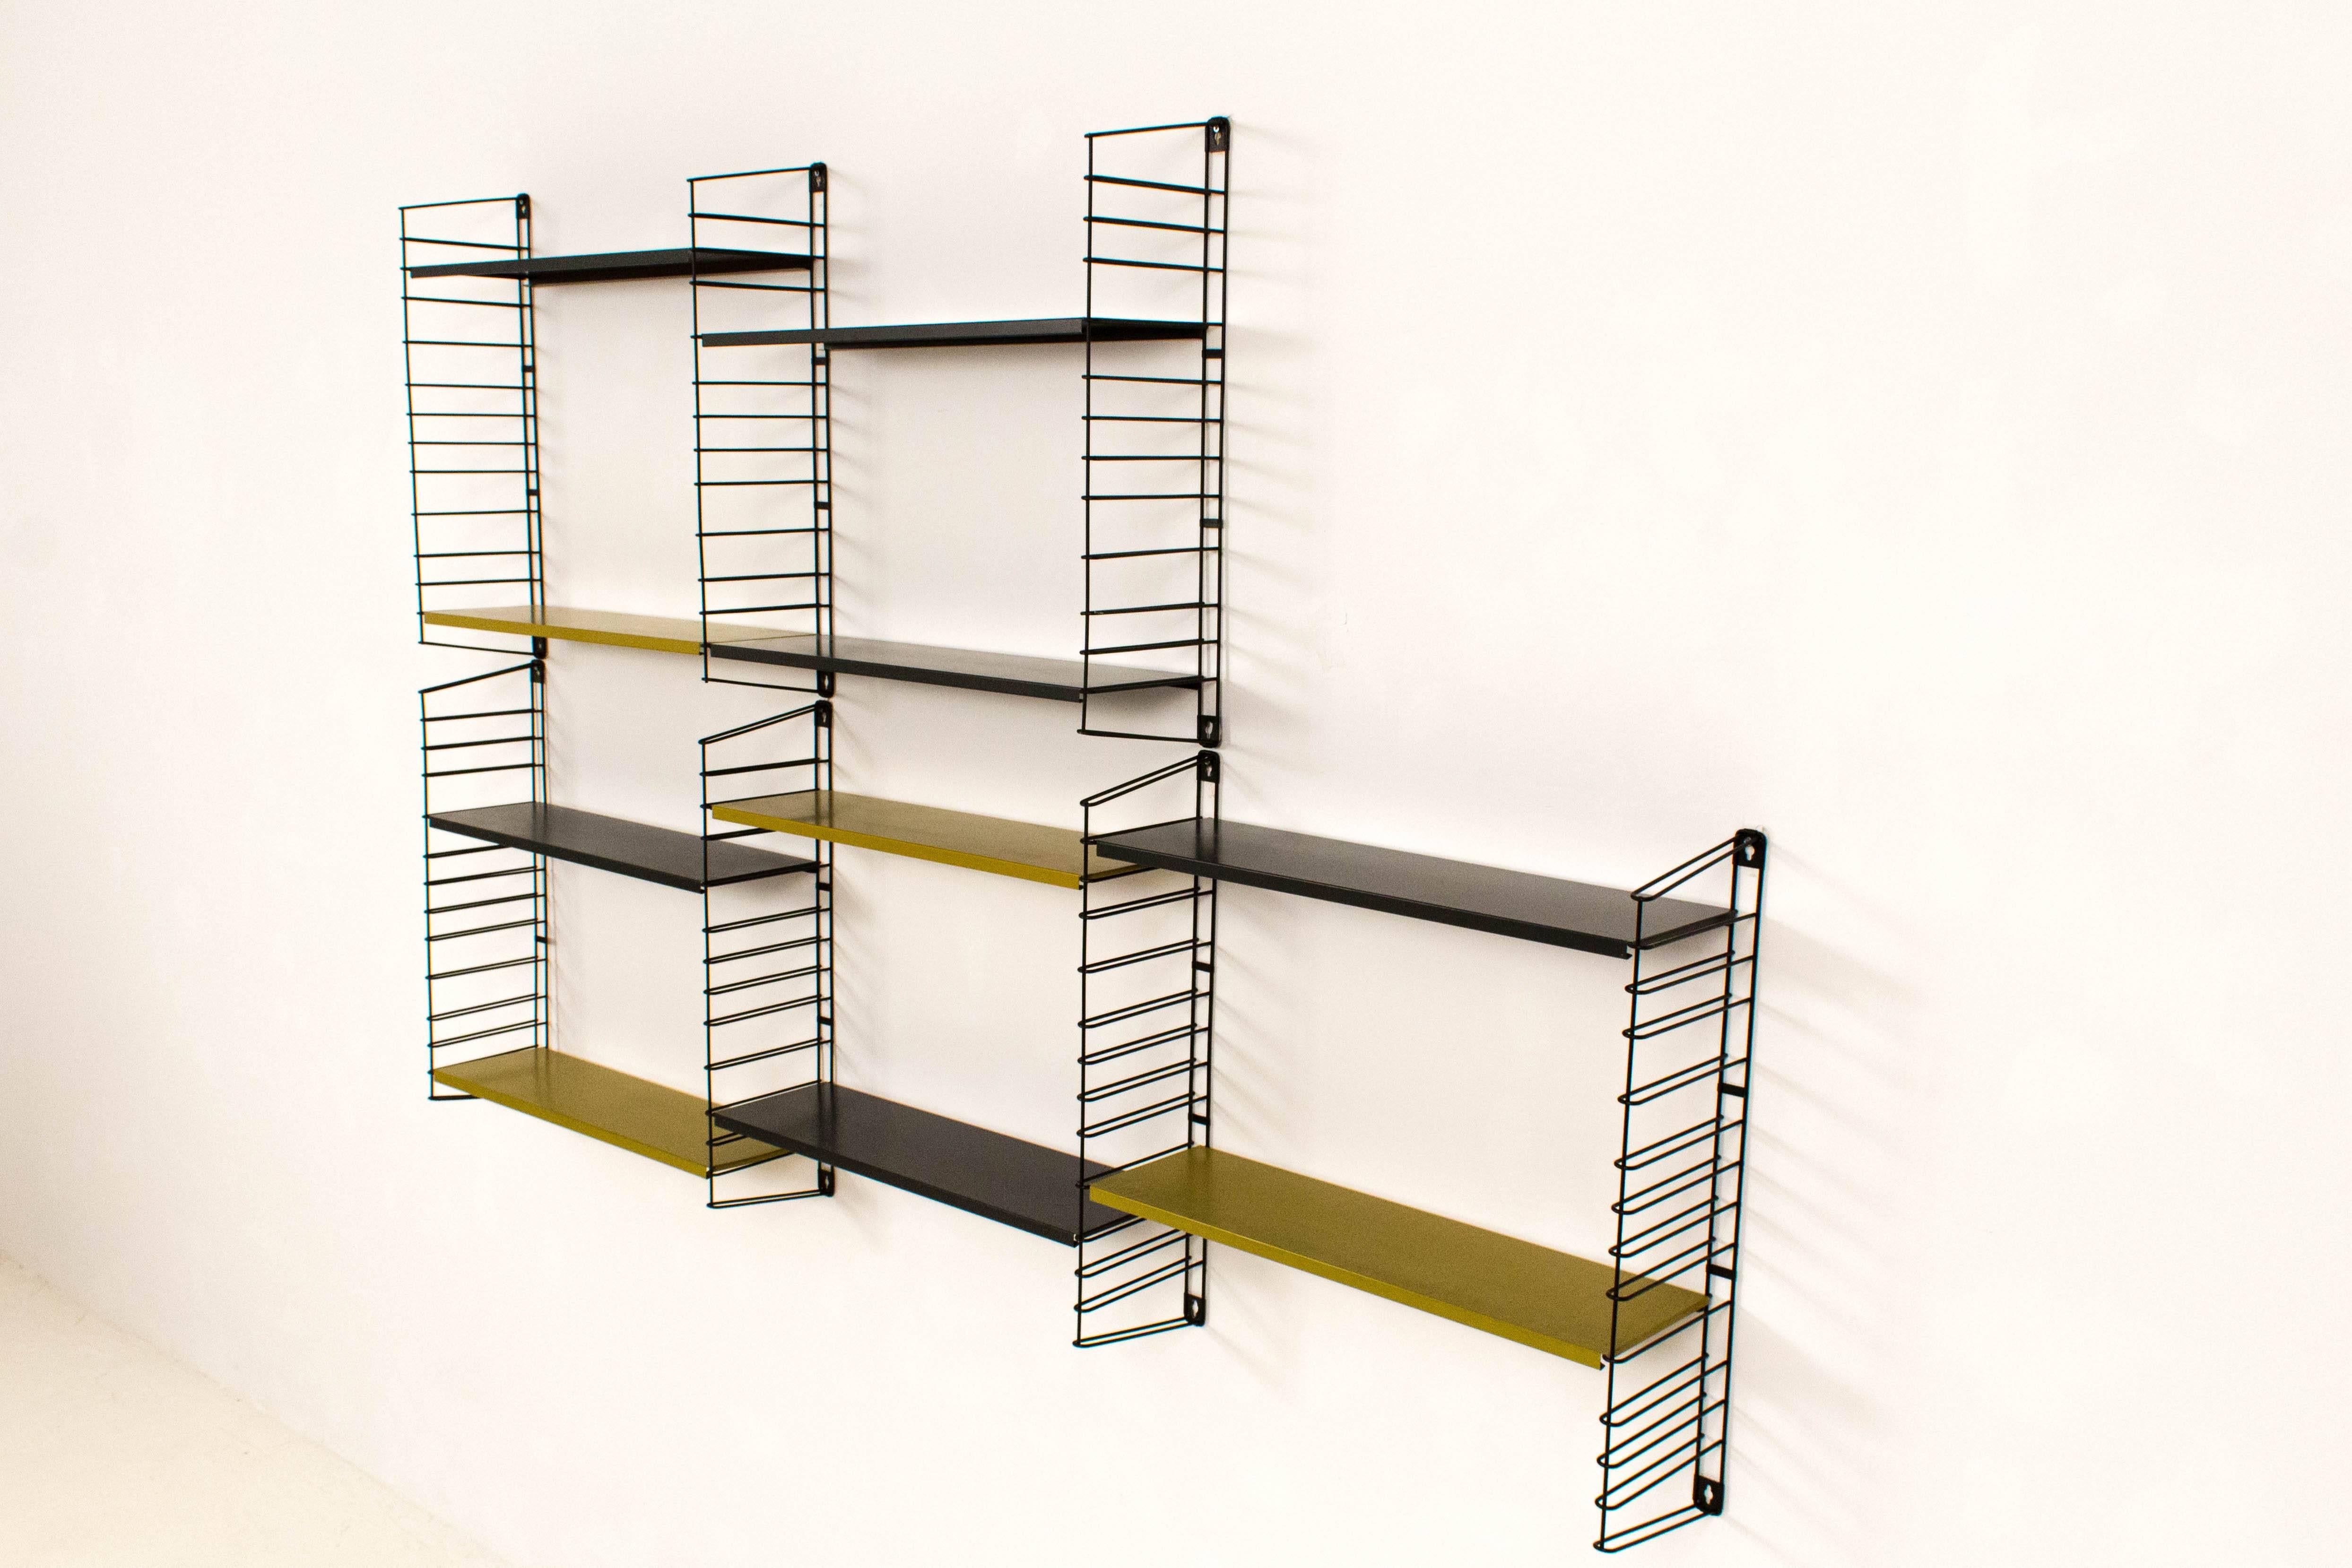 Rare colored metal wall unit by A. Dekker for Tomado, Holland, 1960s.
Five original black shelves and four original moss green shelves.
In good original condition with minor wear consistent with age and use, preserving a beautiful patina.